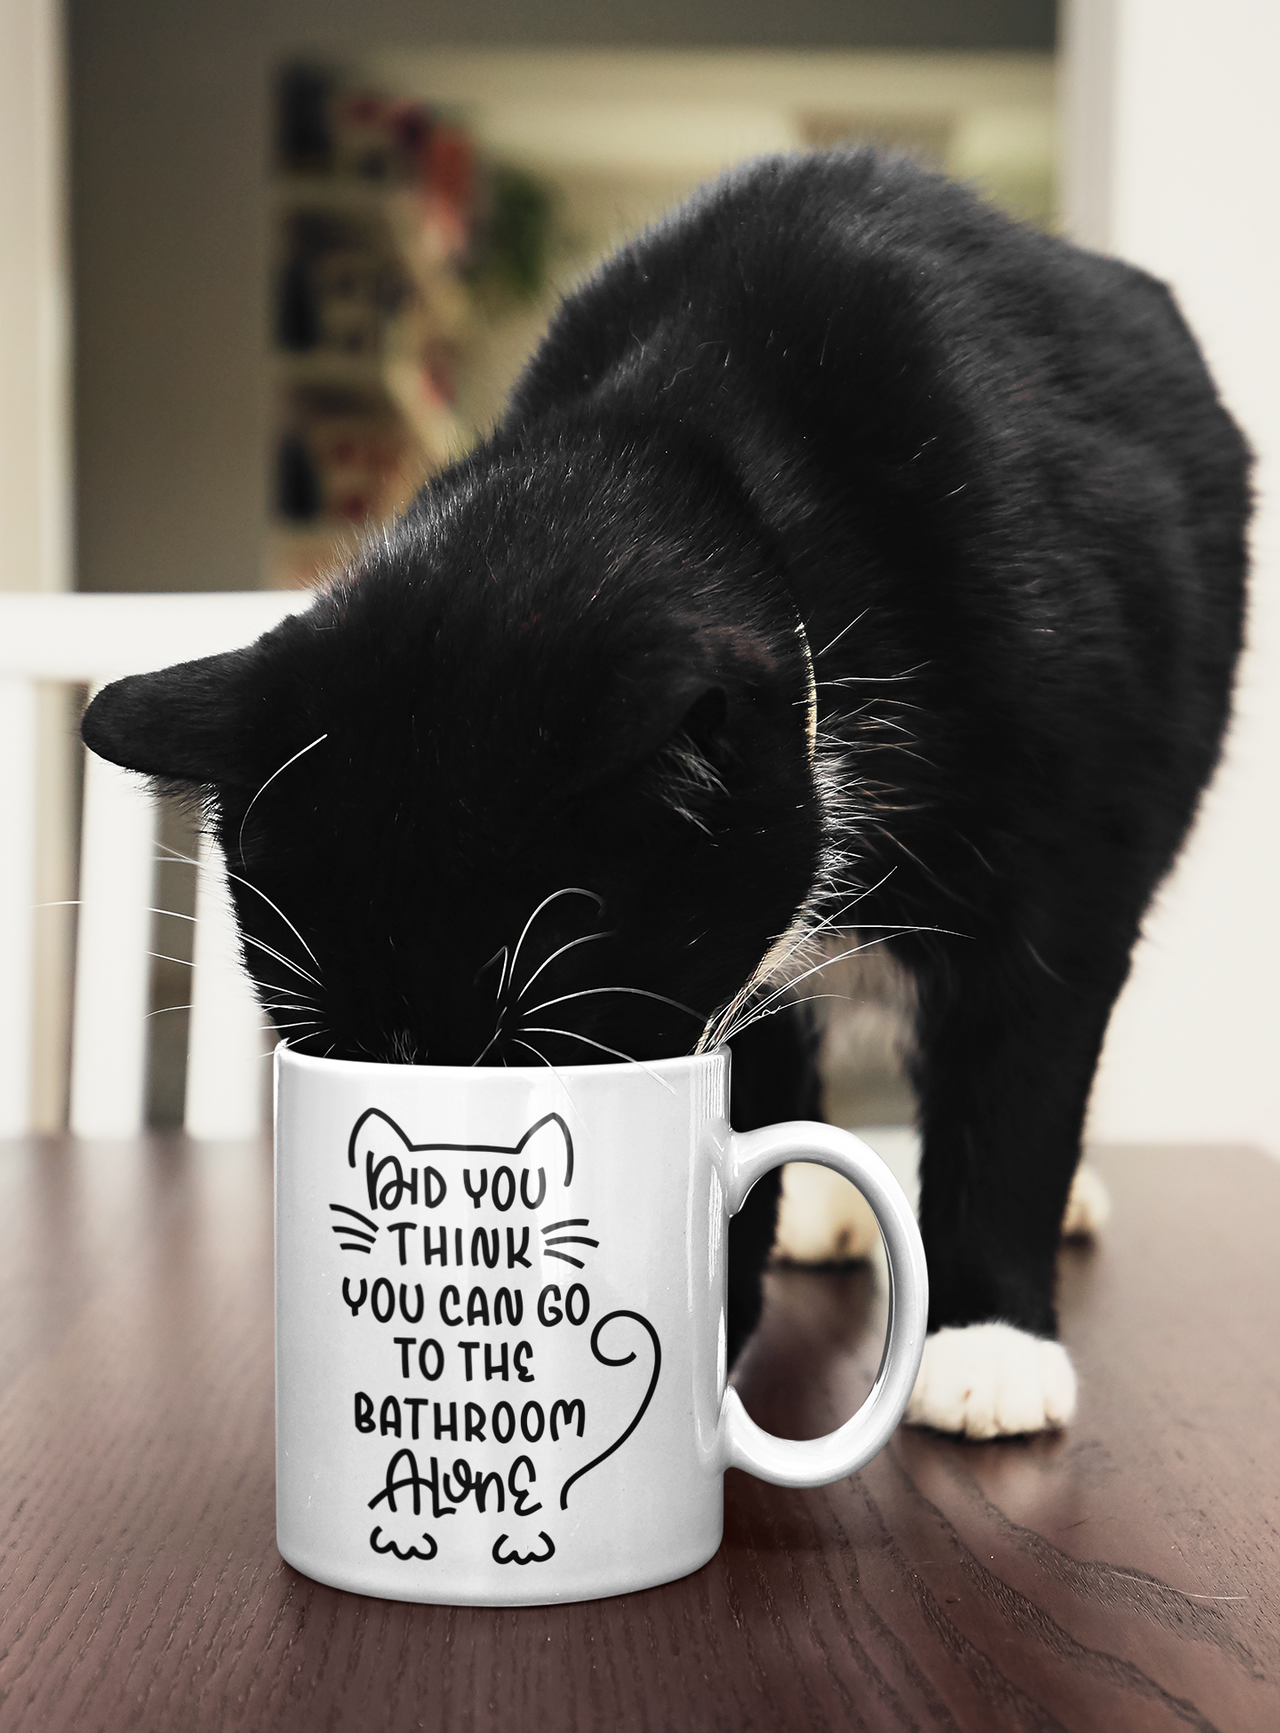 Did You Think You Could Go to the Bathroom Alone Cat Mug